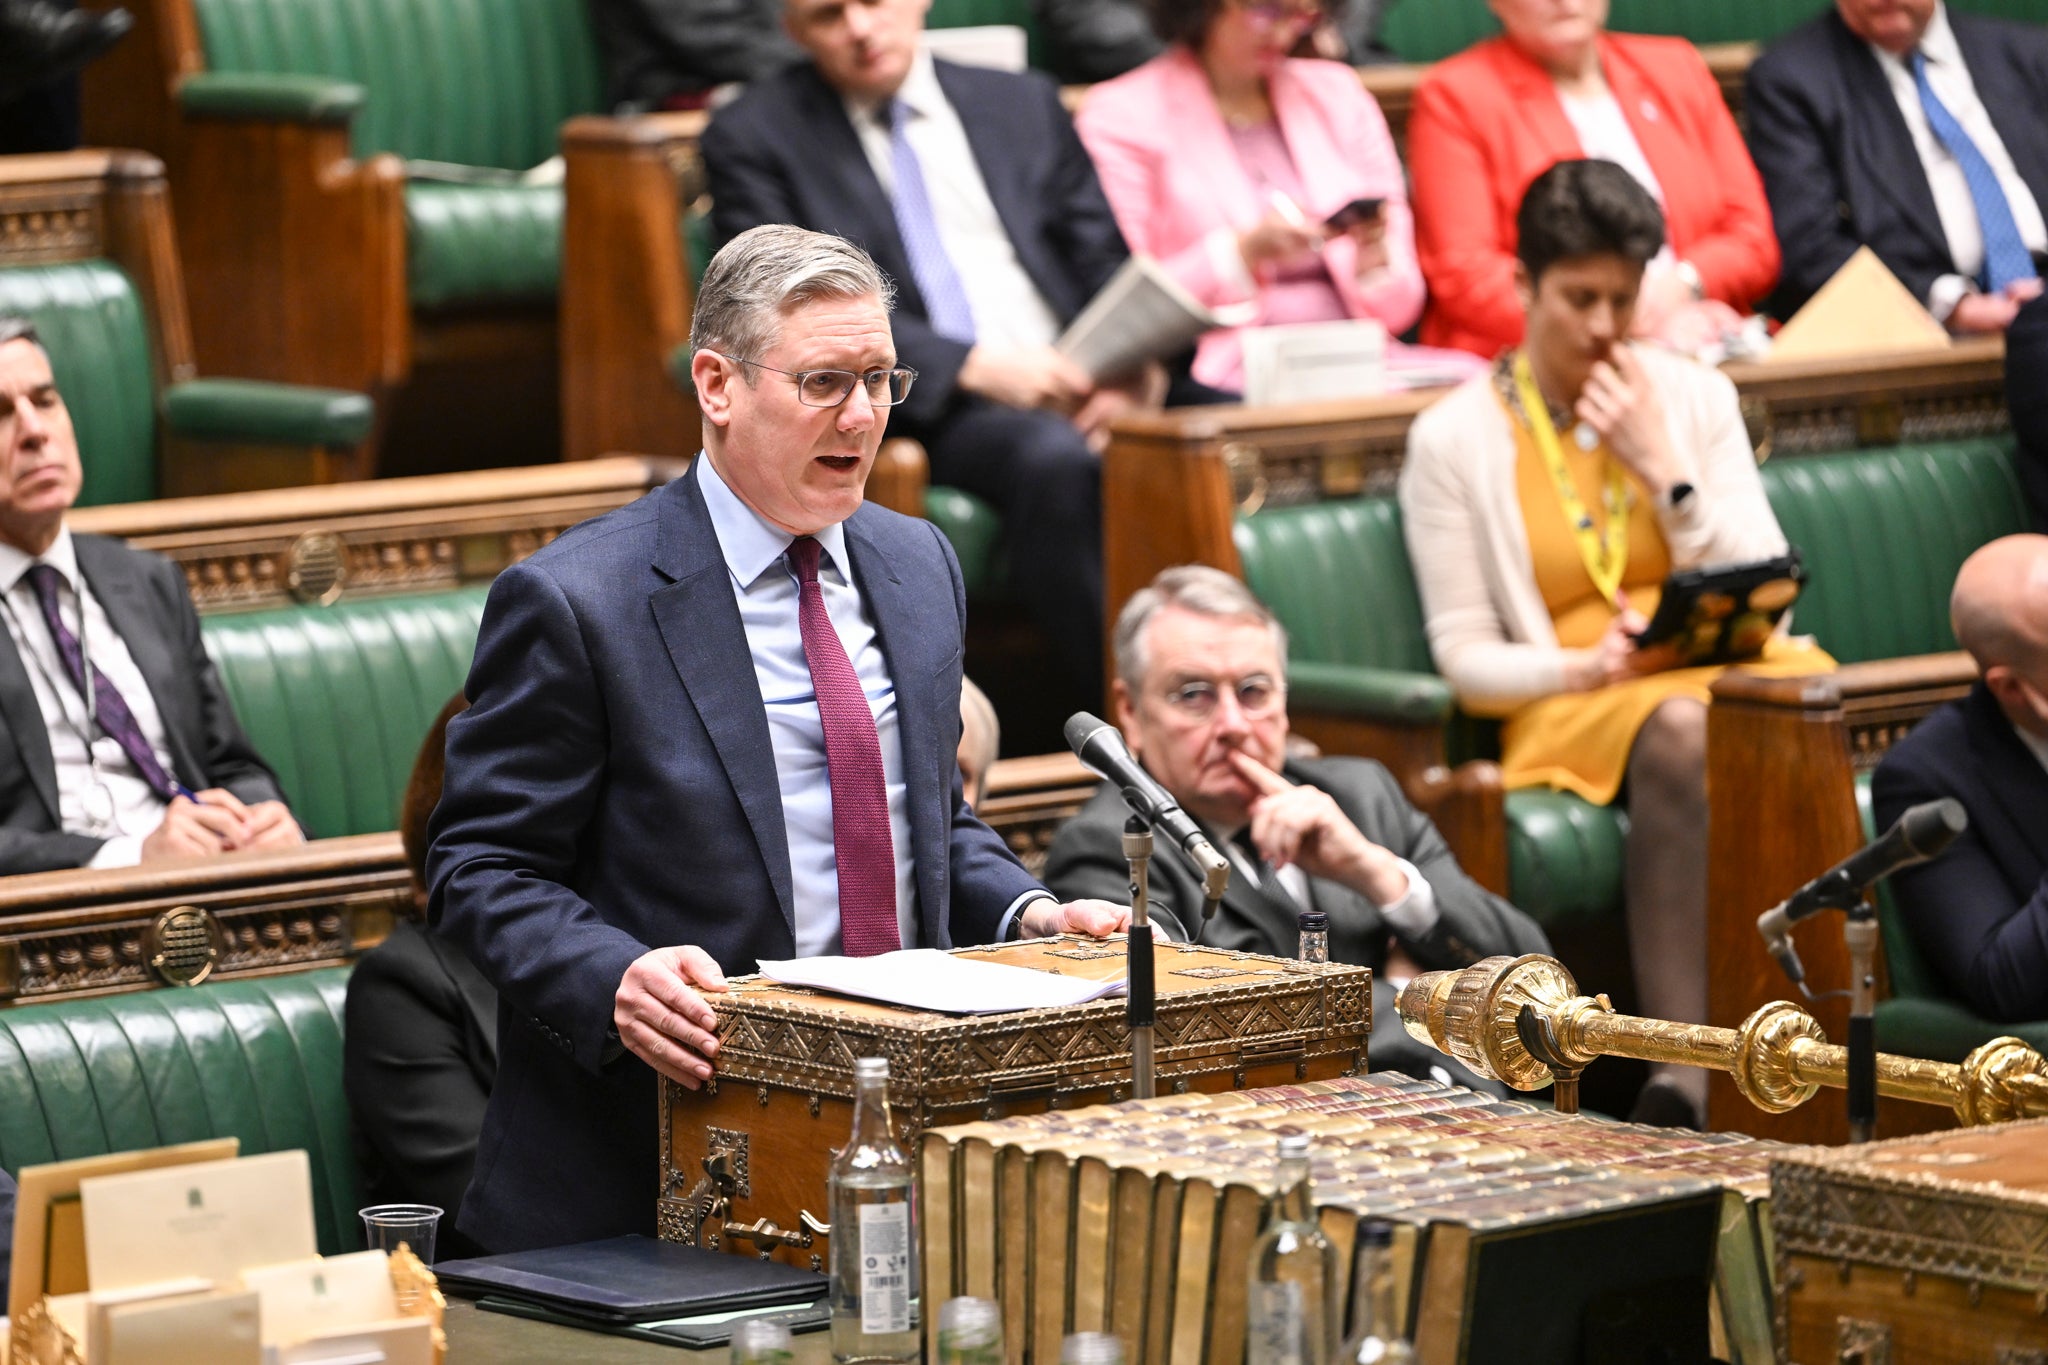 Keir Starmer said the conservatives are ‘not acting in the national interest’ with their tax-cutting agenda